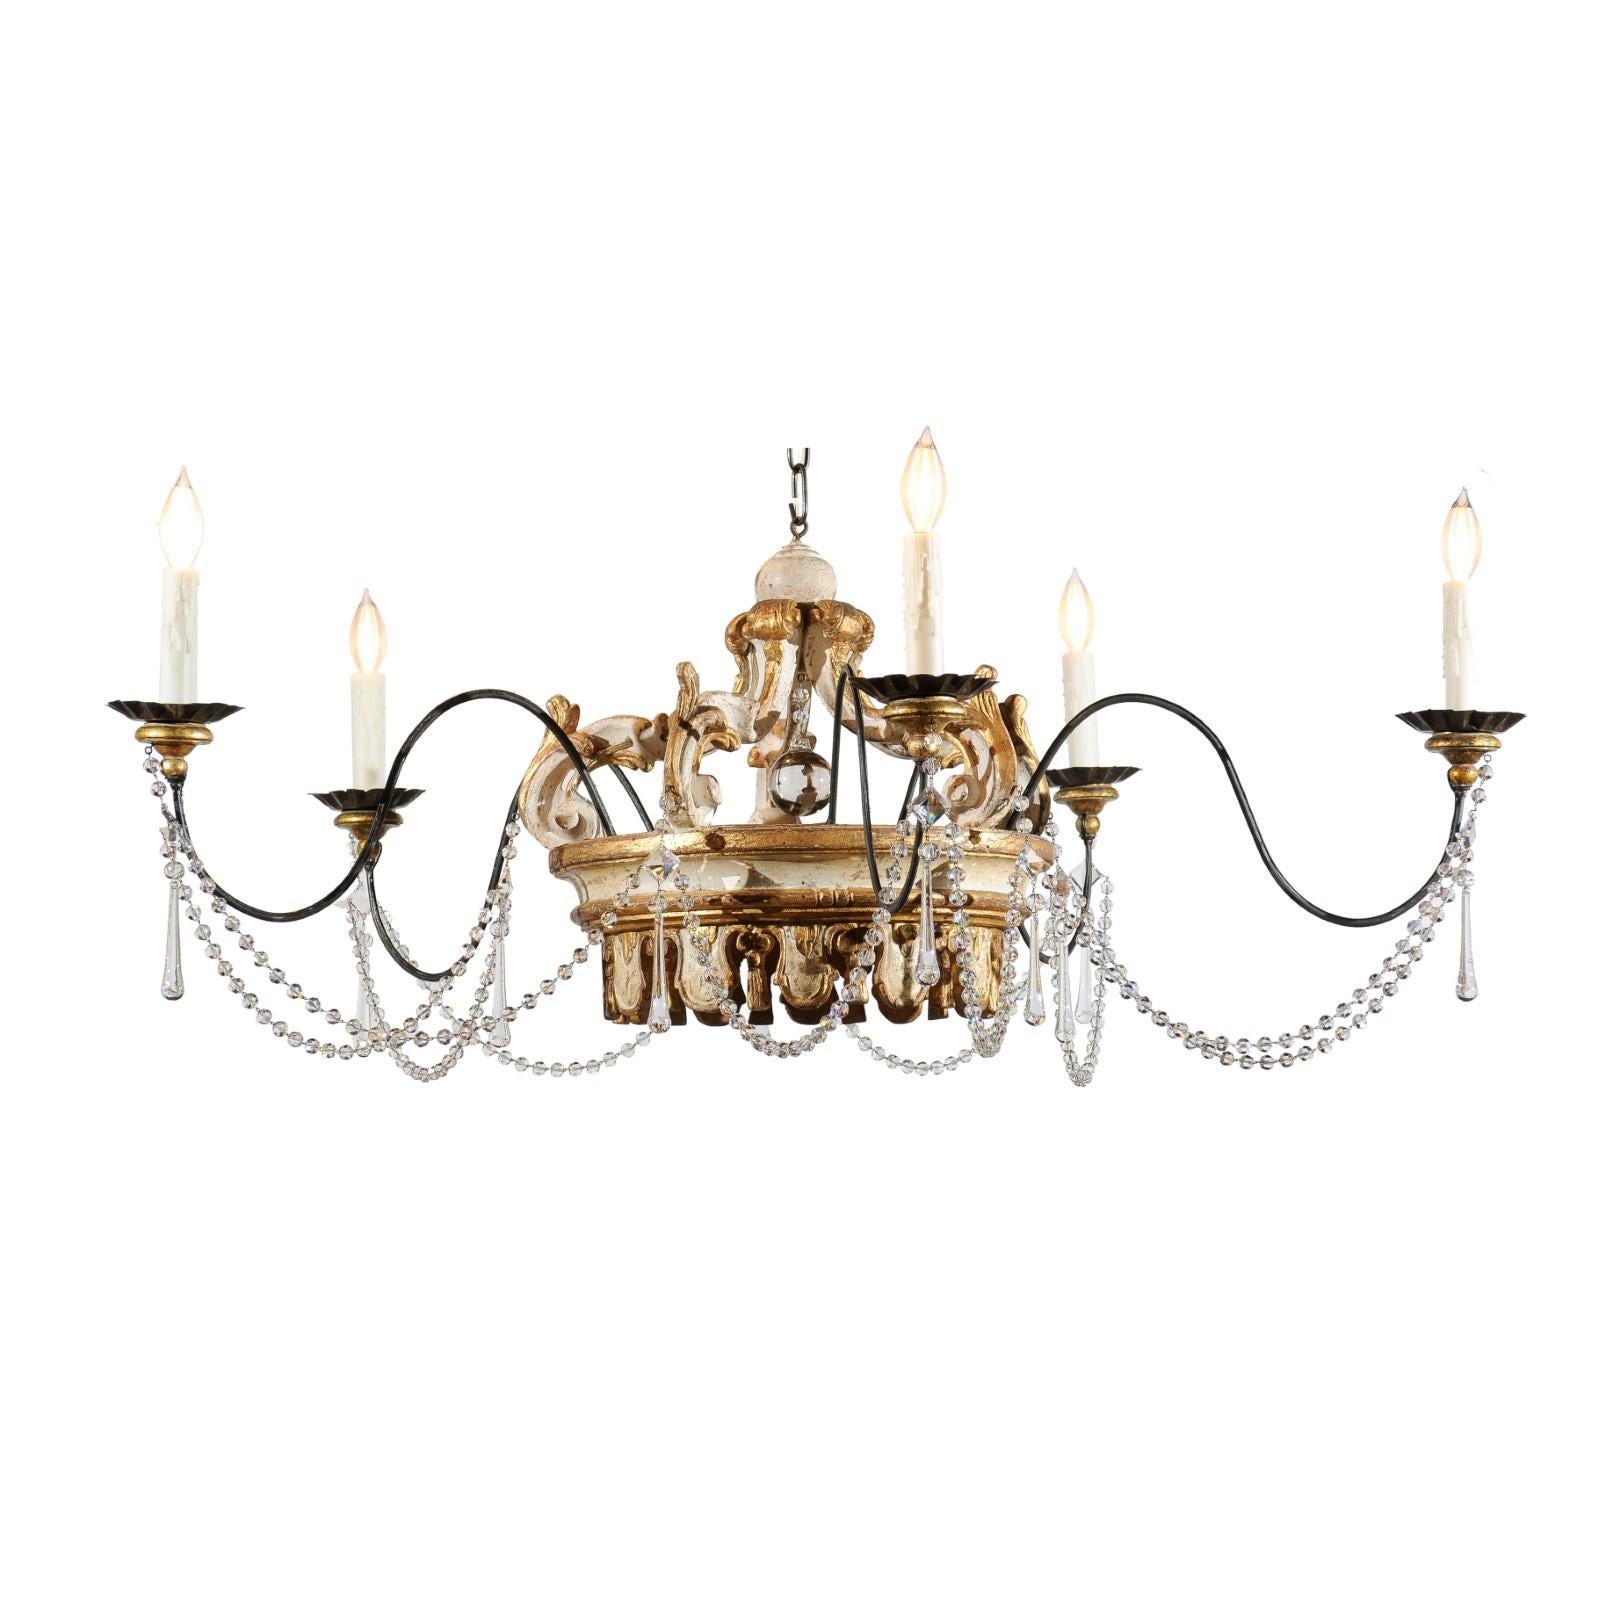 Rococo Style Five-Light Crystal Parcel-Gilt Crown Chandelier with Swoop Arms